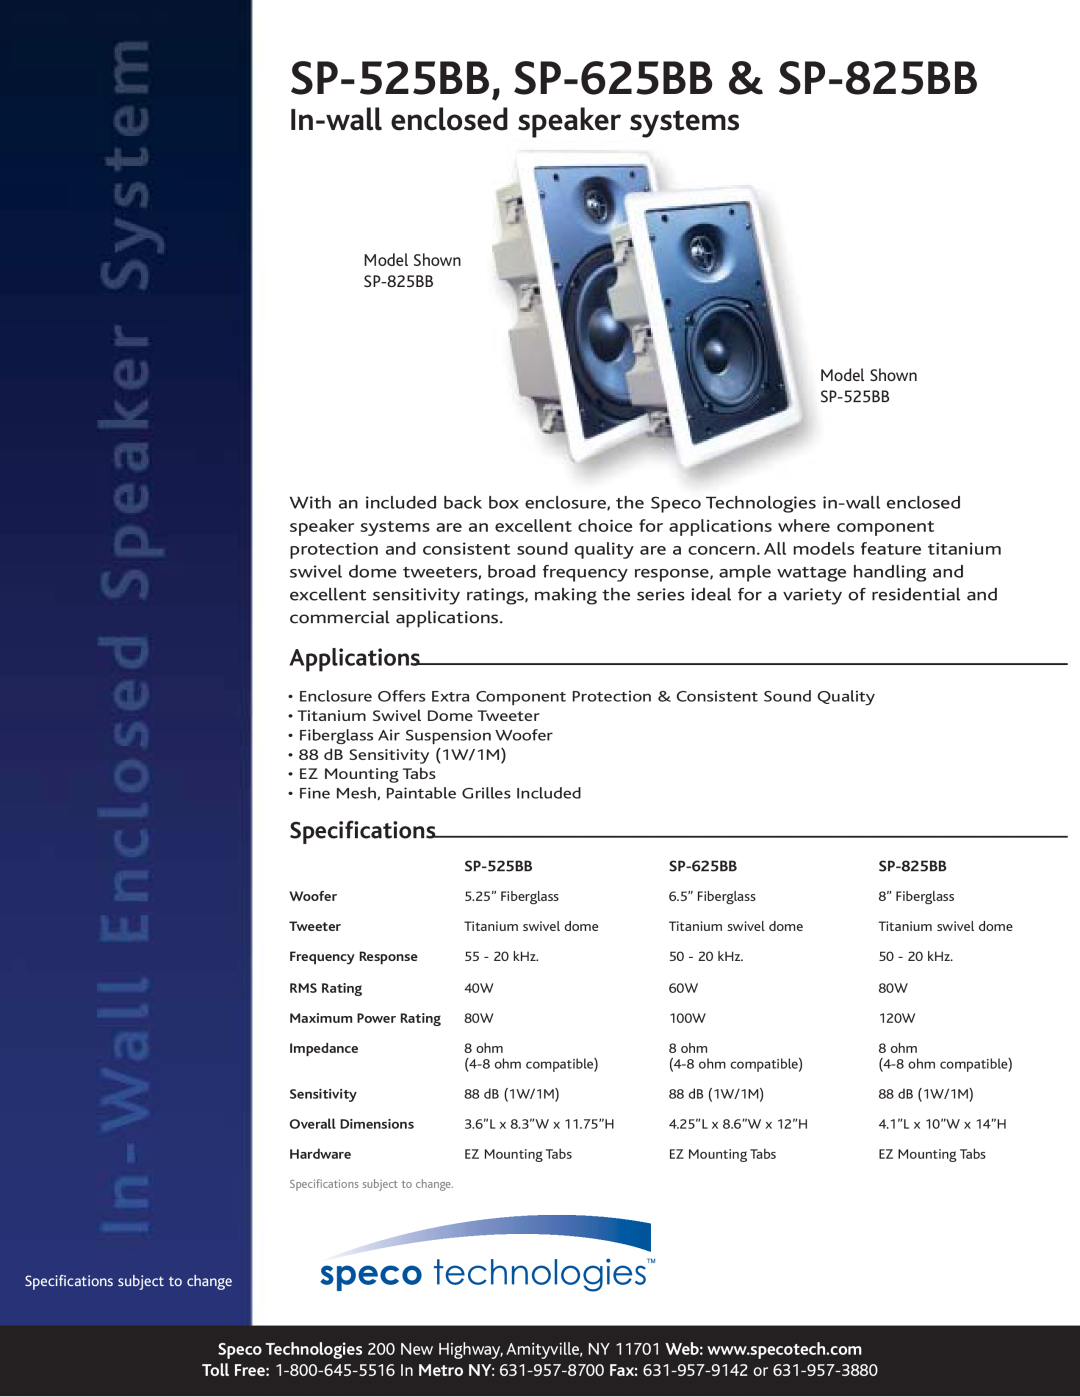 Speco Technologies specifications SP-525BB, SP-625BB& SP-825BB, In-wallenclosed speaker systems, Applications 